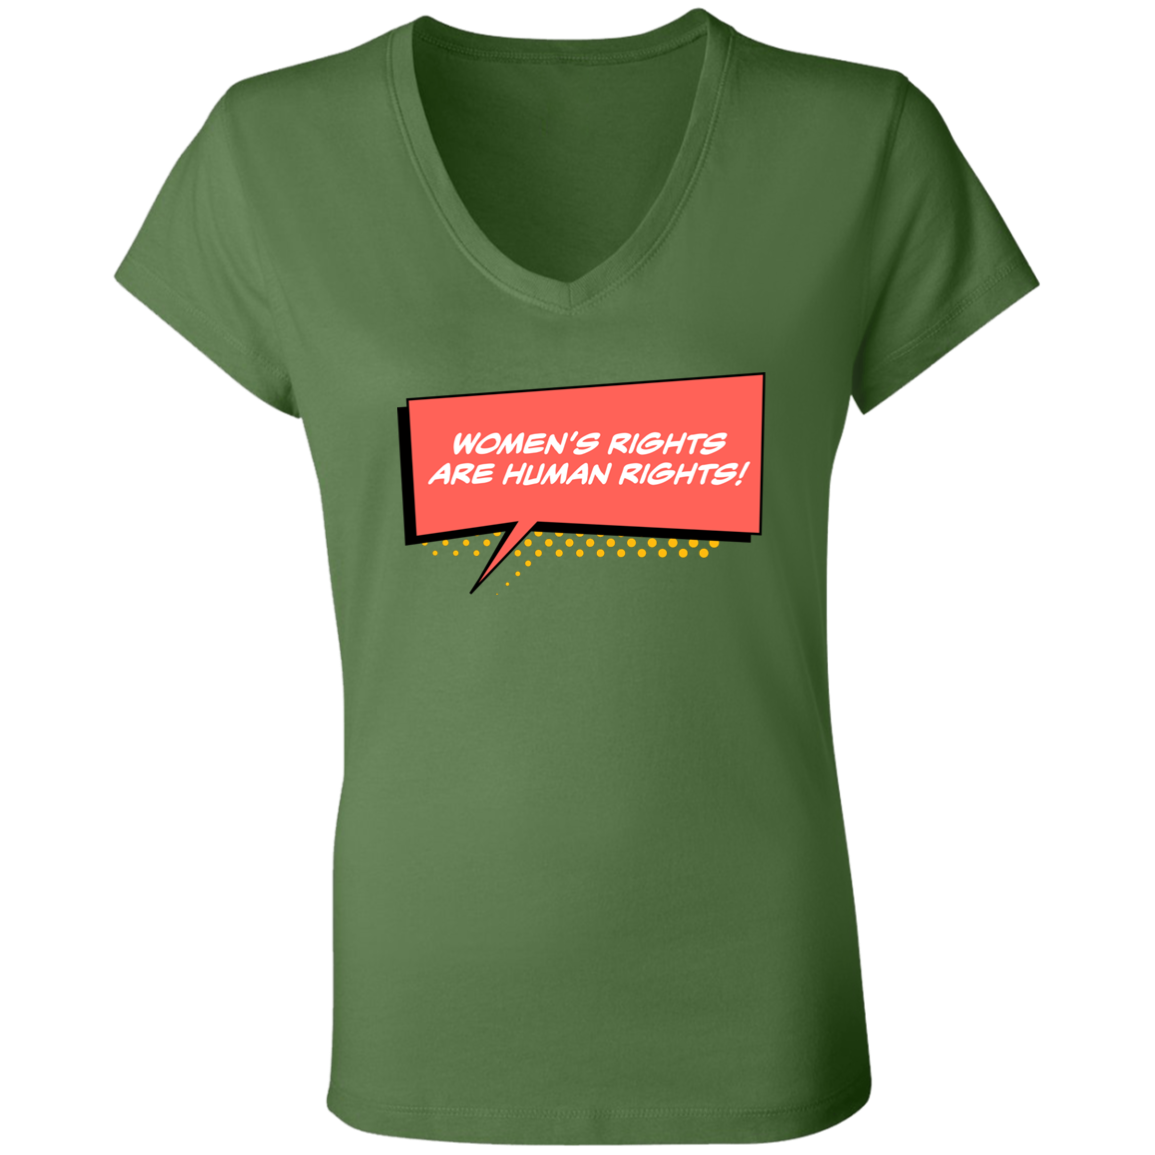 Women Are Human... Ladies' Jersey V-Neck T-Shirt